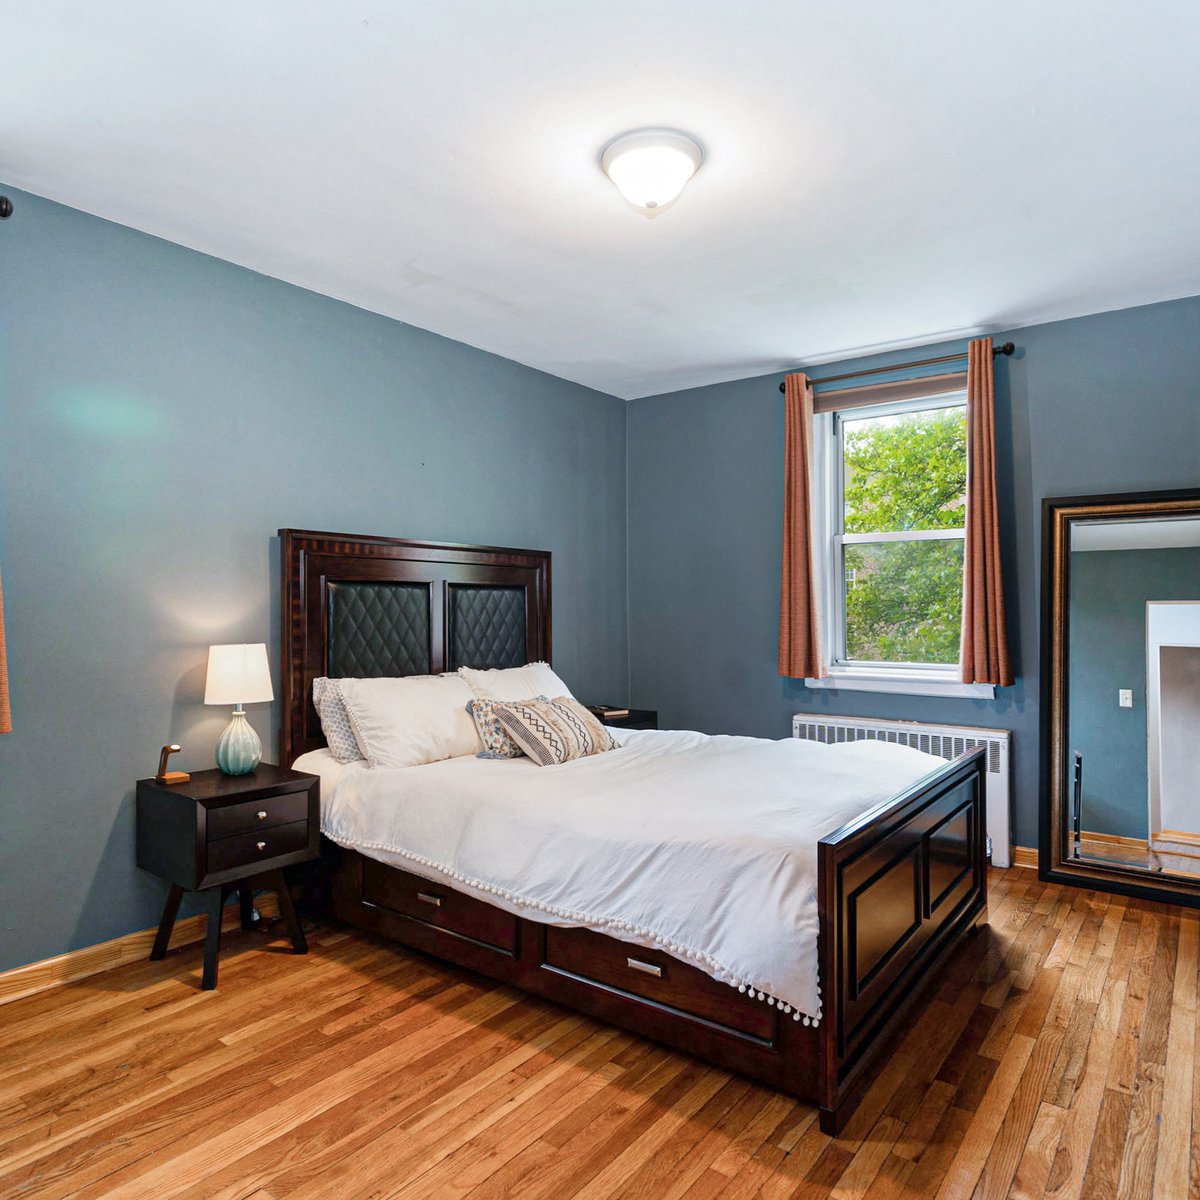 🚨 NEW LISTING 🚨
📍765 Bronx River Road #4A, Bronxville
2 🛏️ 1 🛁 900📐
Check out listing section in the link in our bio for more information and images. 
DM to schedule an appointment!
#theiglesiasteam #bronxville, #bronxvillerealestate